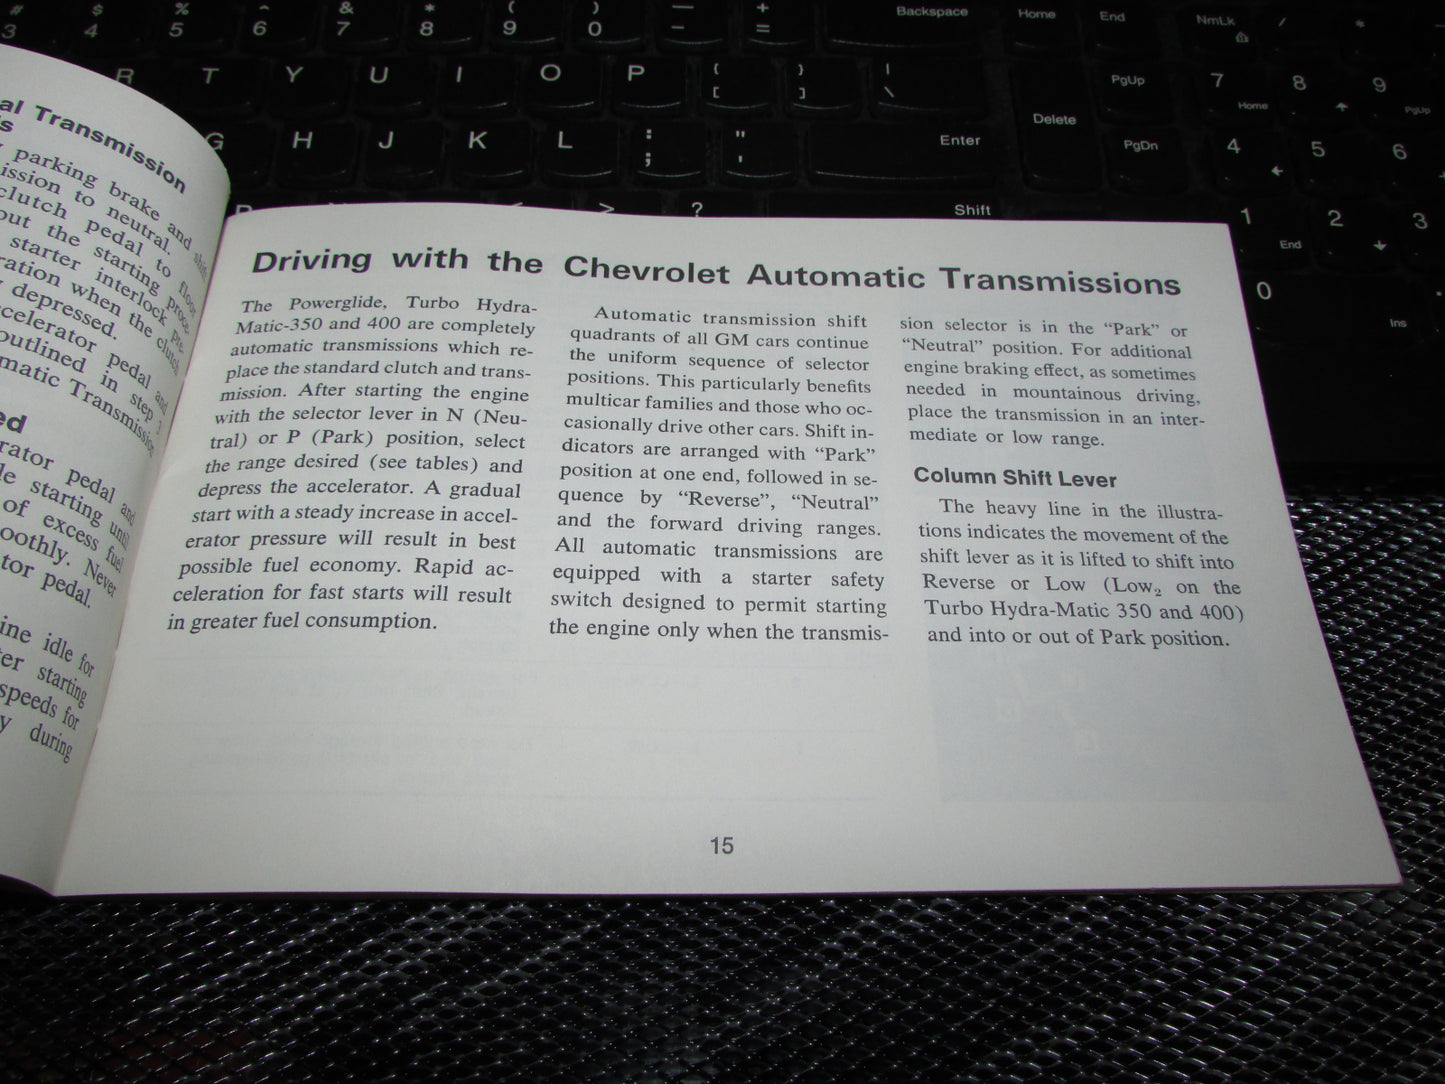 Chevrolet Station Wagon (1971) Owners Manual